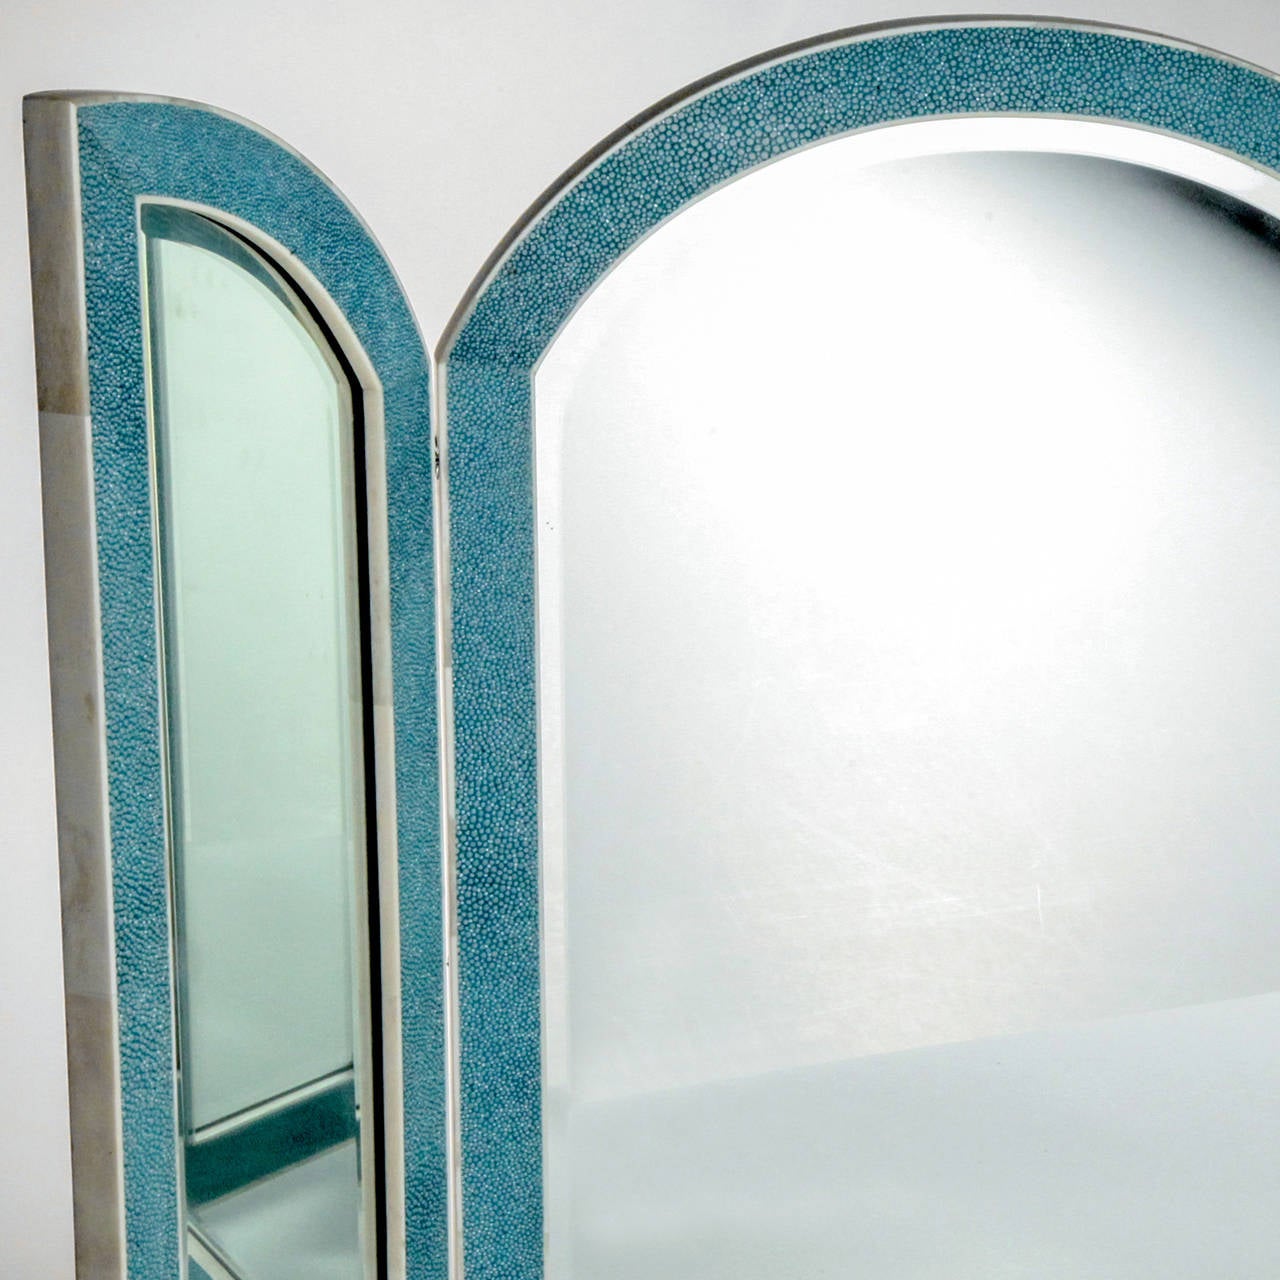 Striking handcrafted tri-fold mirror framed in turquoise shagreen stingray with bone trim. Handmade in France.